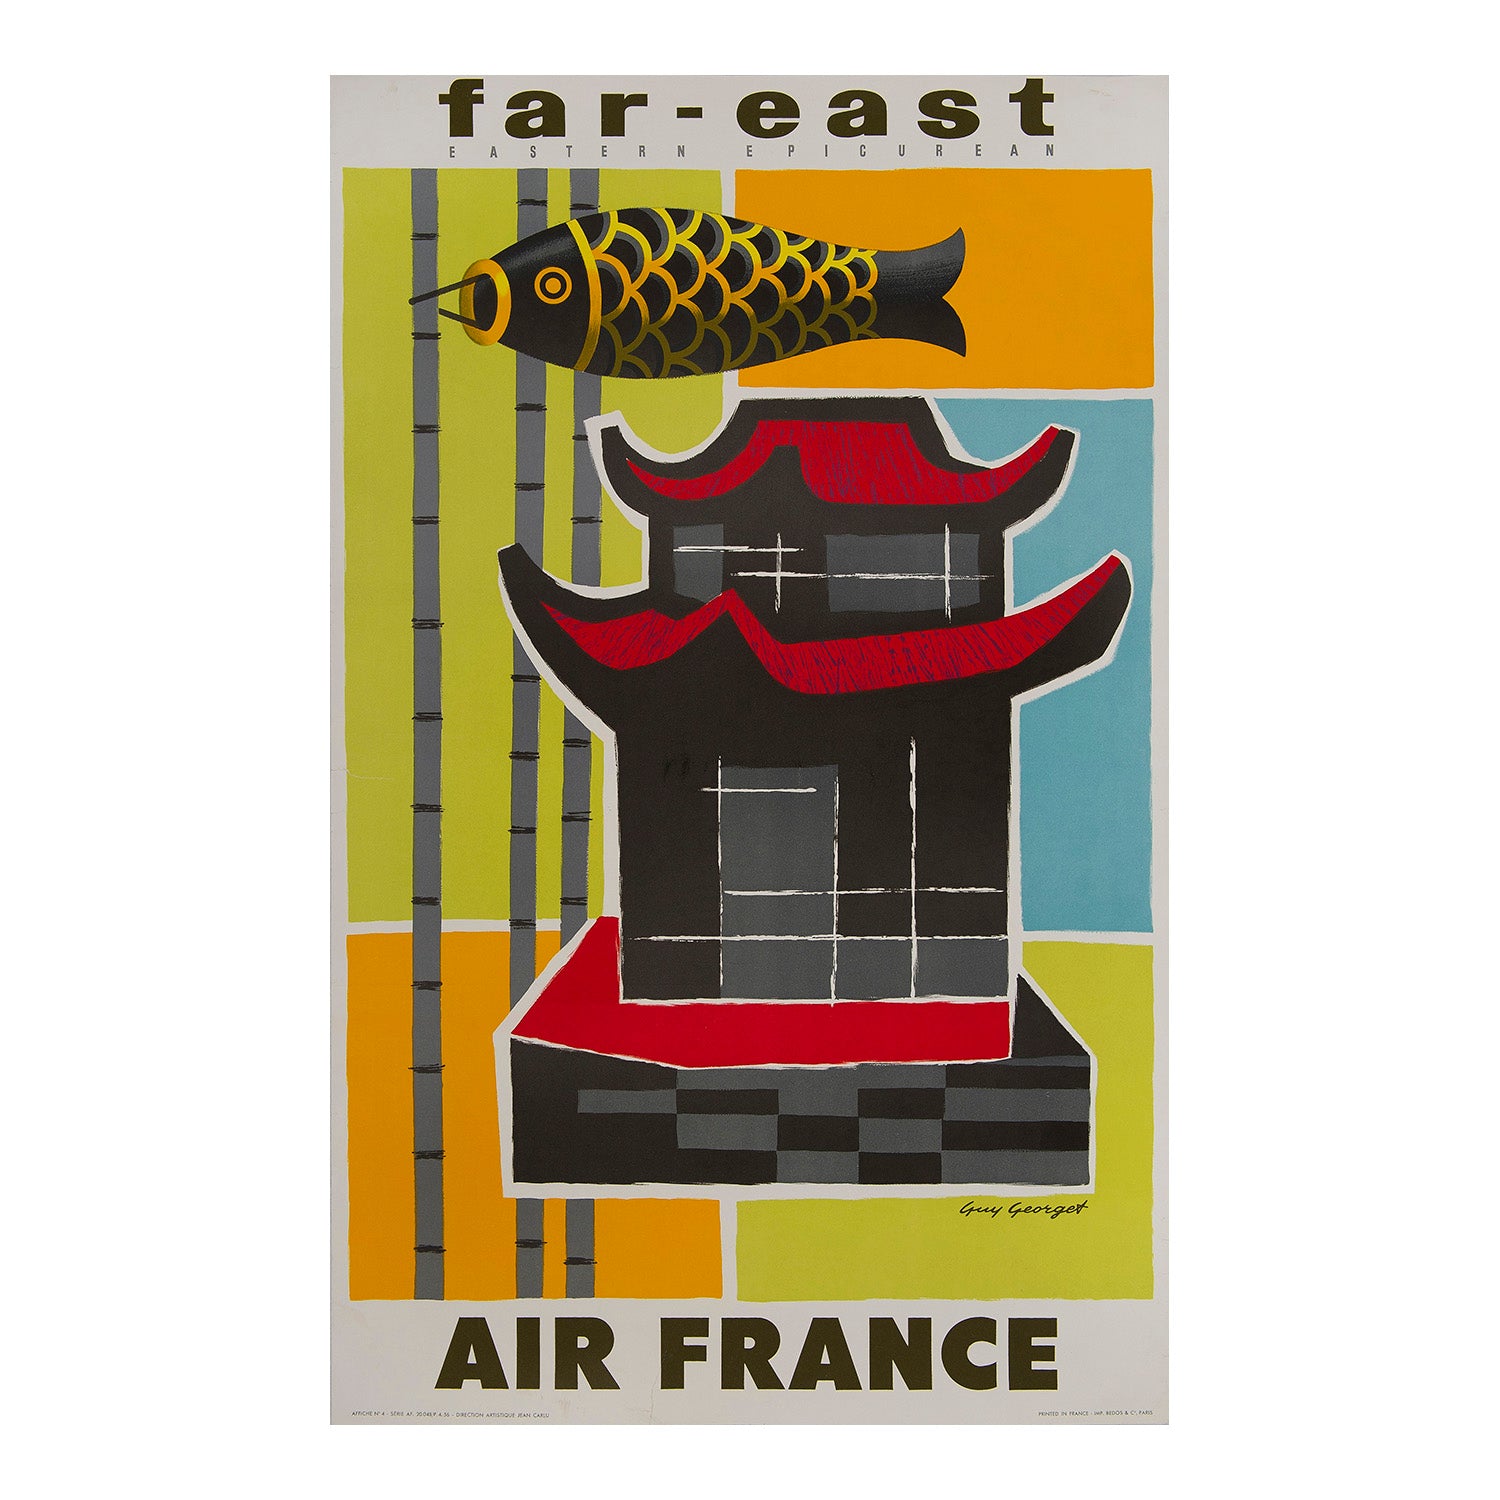 Original Air France poster by Guy Georget, 1956, Far East. Stylised Japanese pagoda with a Chinese fish kite and bamboo motif